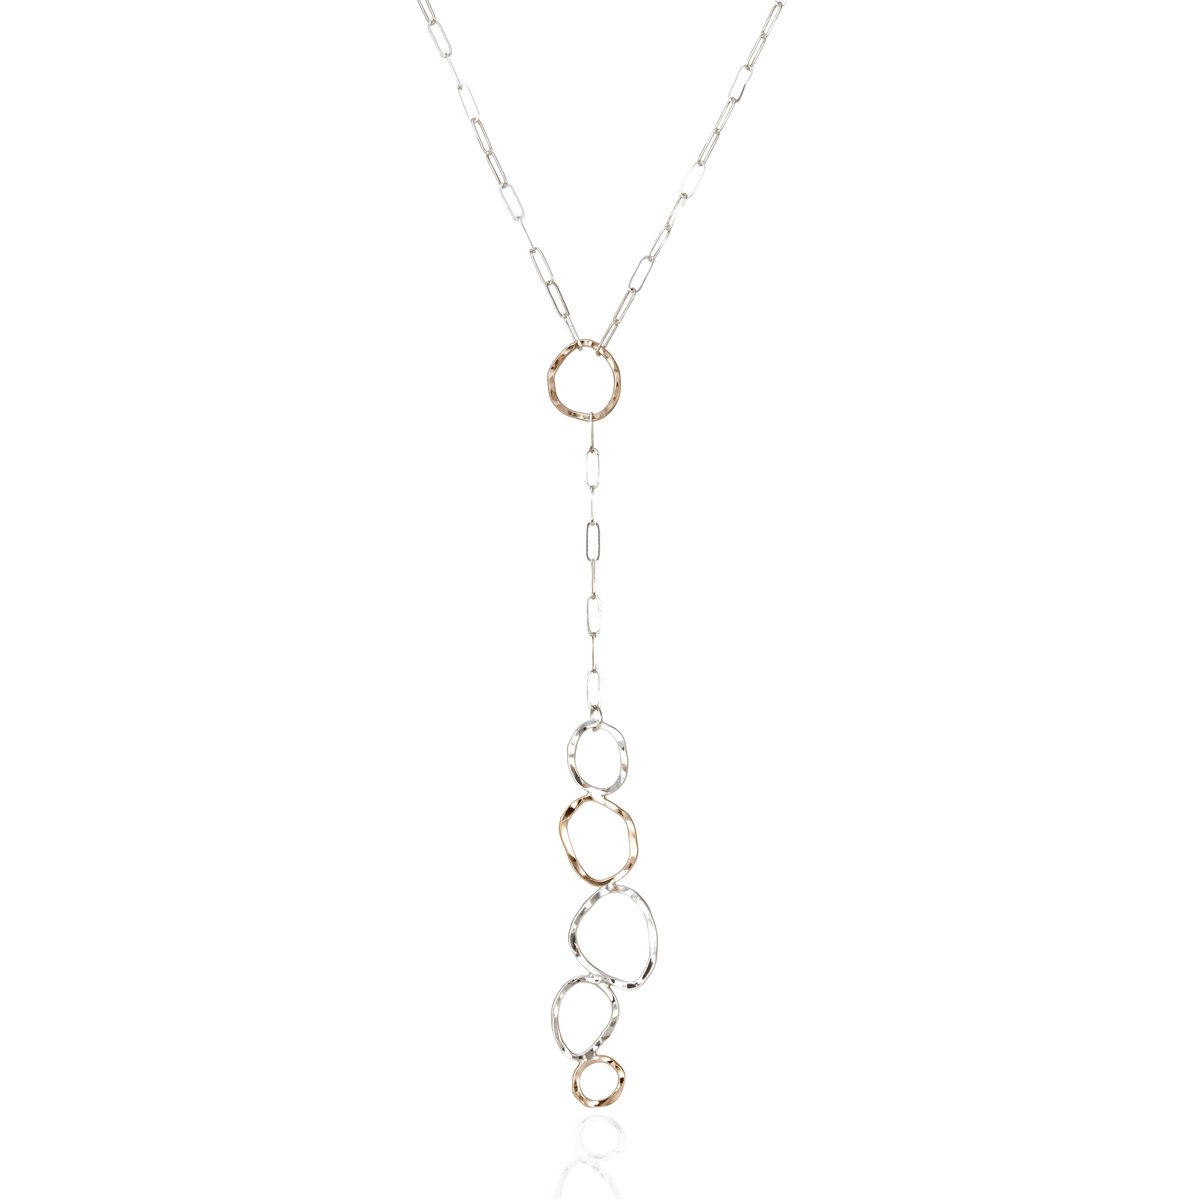 Stepping Stones Lariat Necklace | Marjorie Victor Jewelry